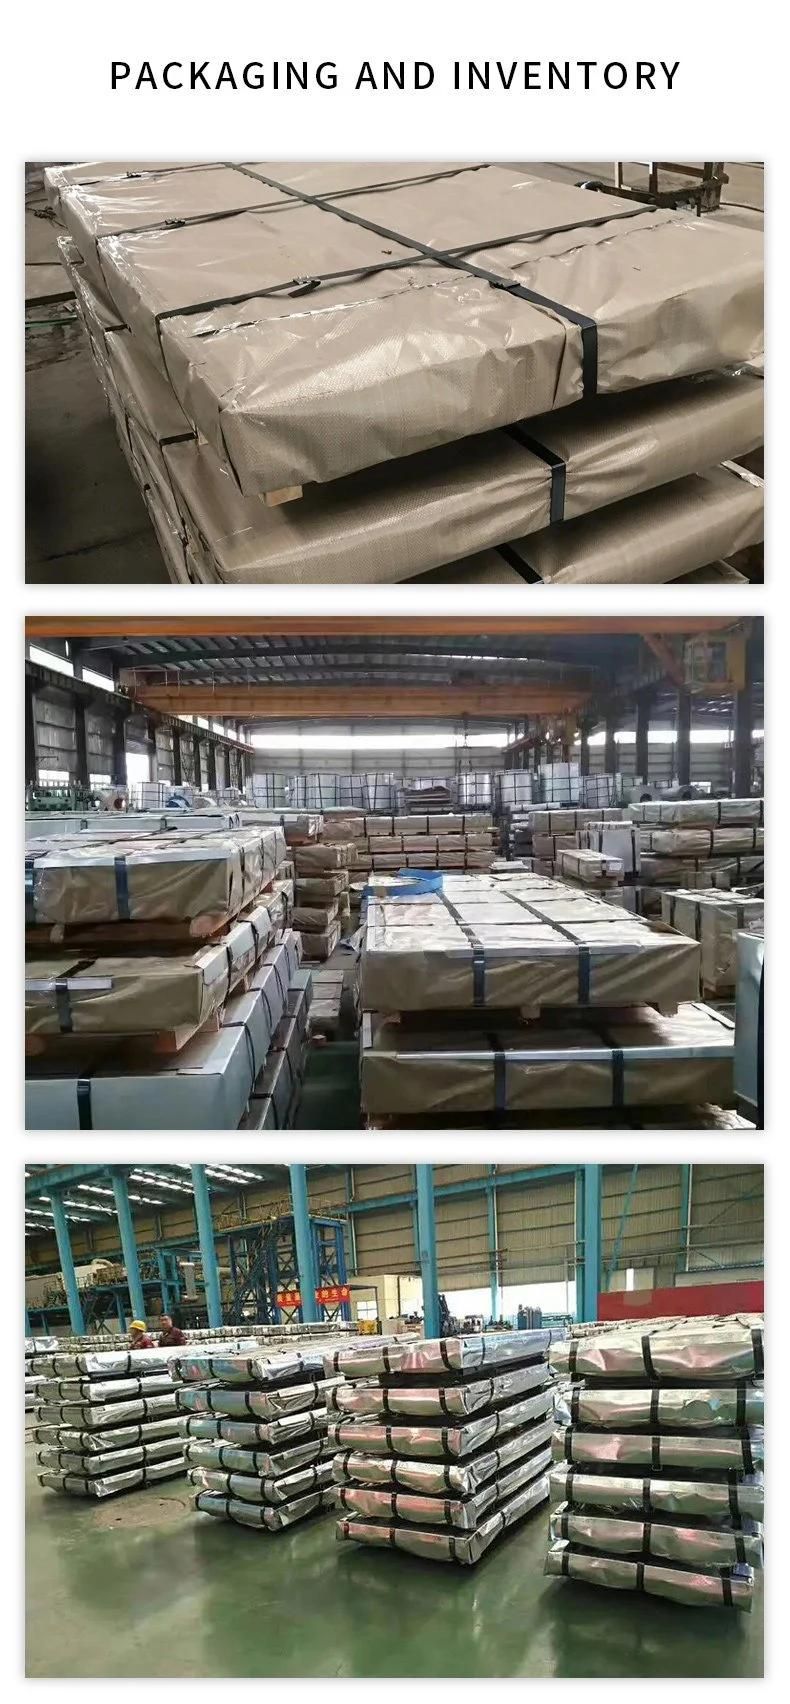 Z100 Used Corrugated Roof Iron Z275 Galvanized Steel Price Per Ton Construction Metal Sheet Chromated Passivation Treatment Oiling 15 Days Delivery Time Sheet